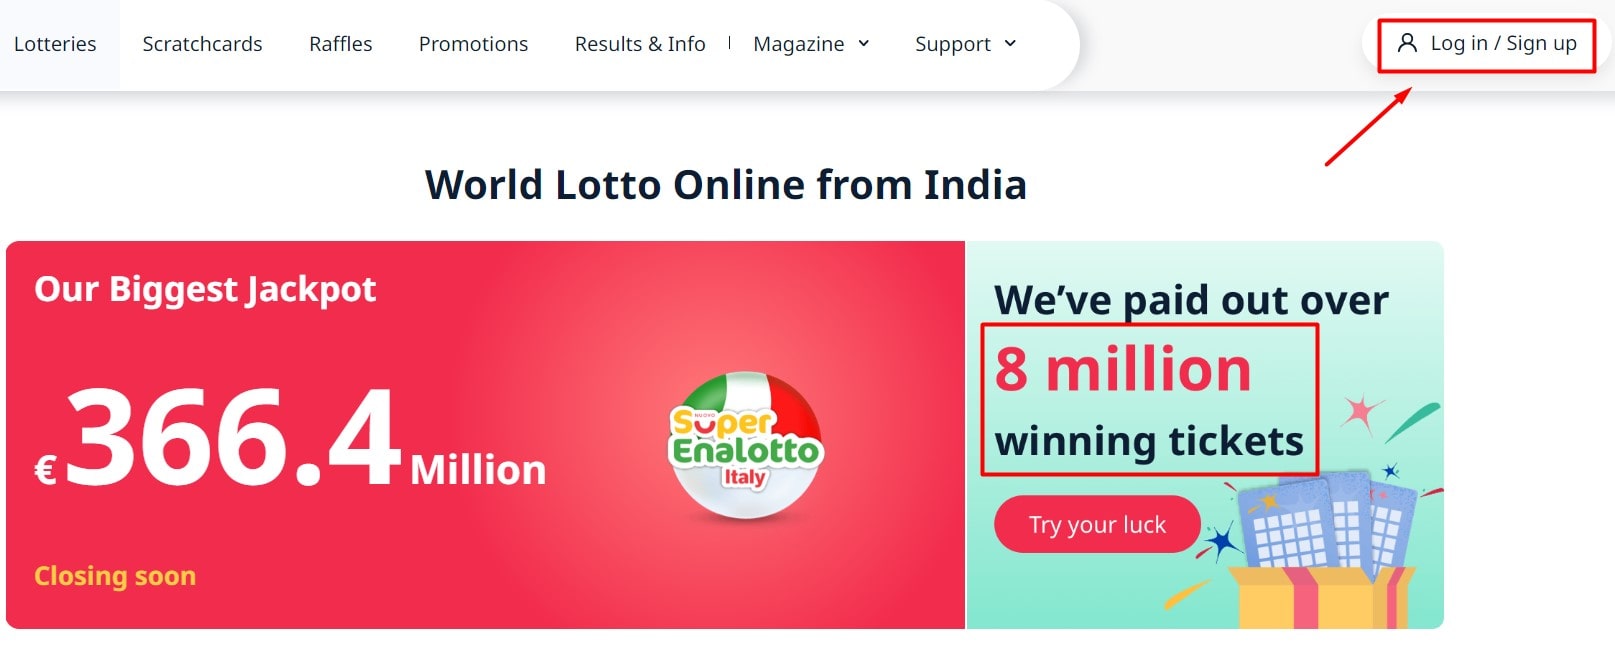 Register an account on lottery site